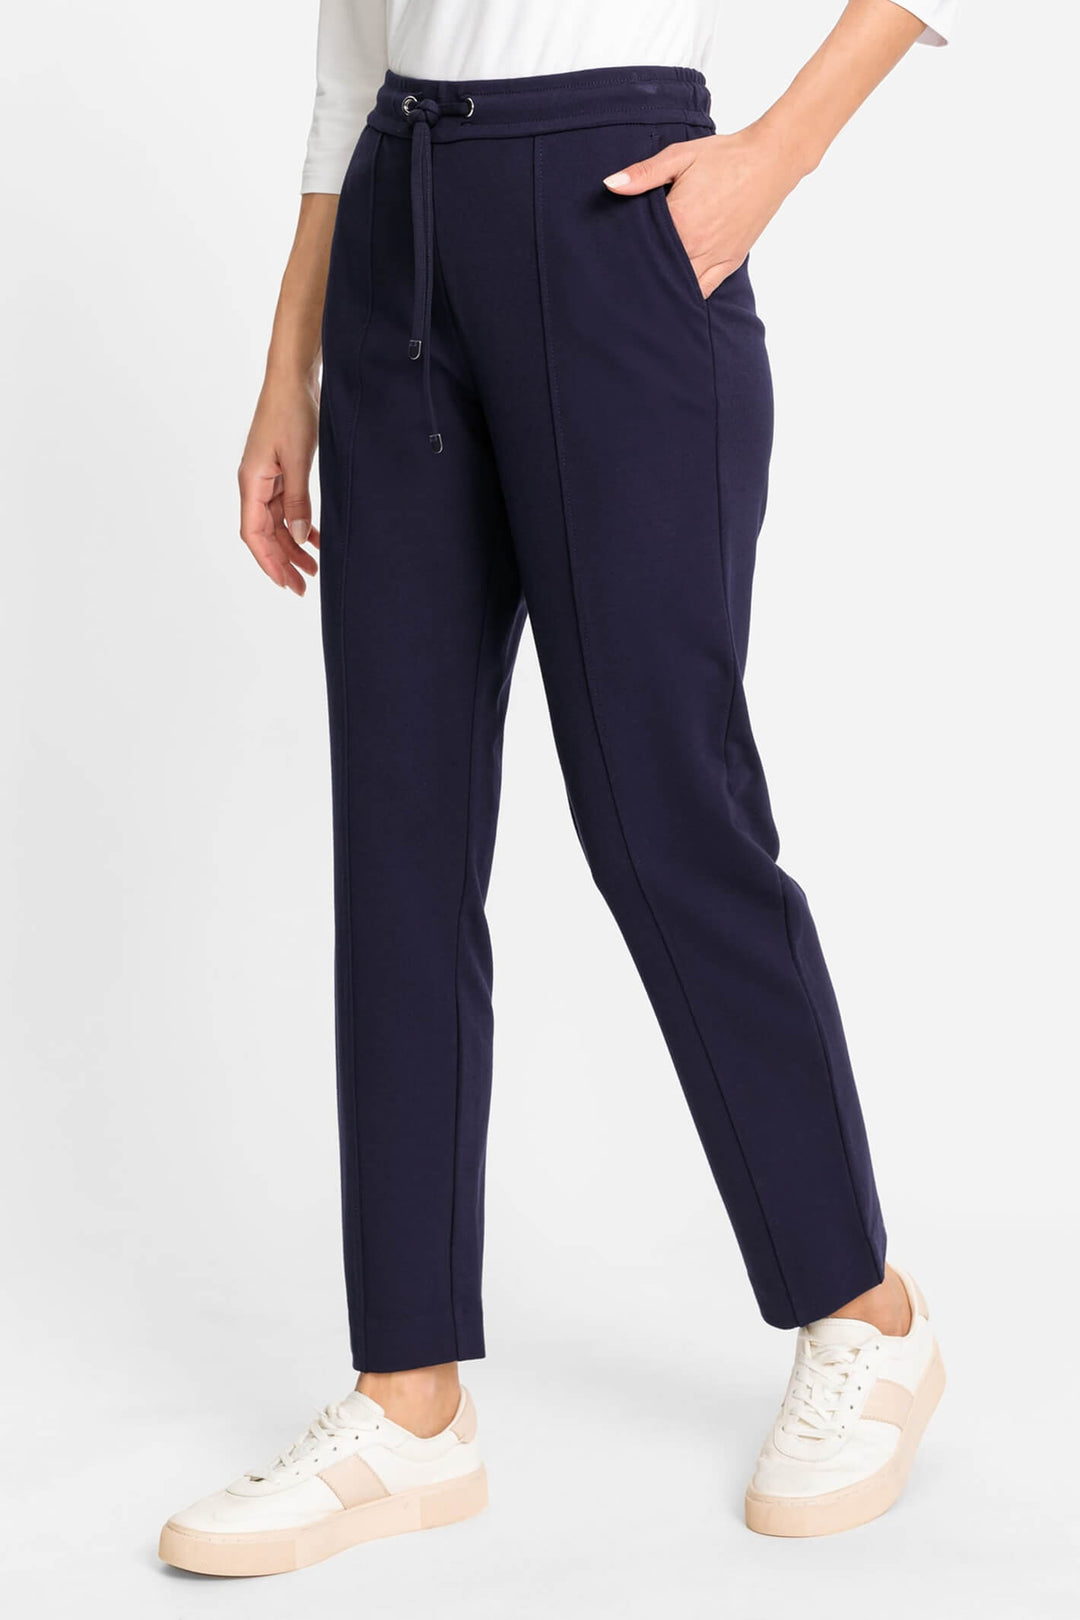 Olsen 14002101 Navy Ink Blue Pull-On Drawstring Waist Trousers - Experience Boutique